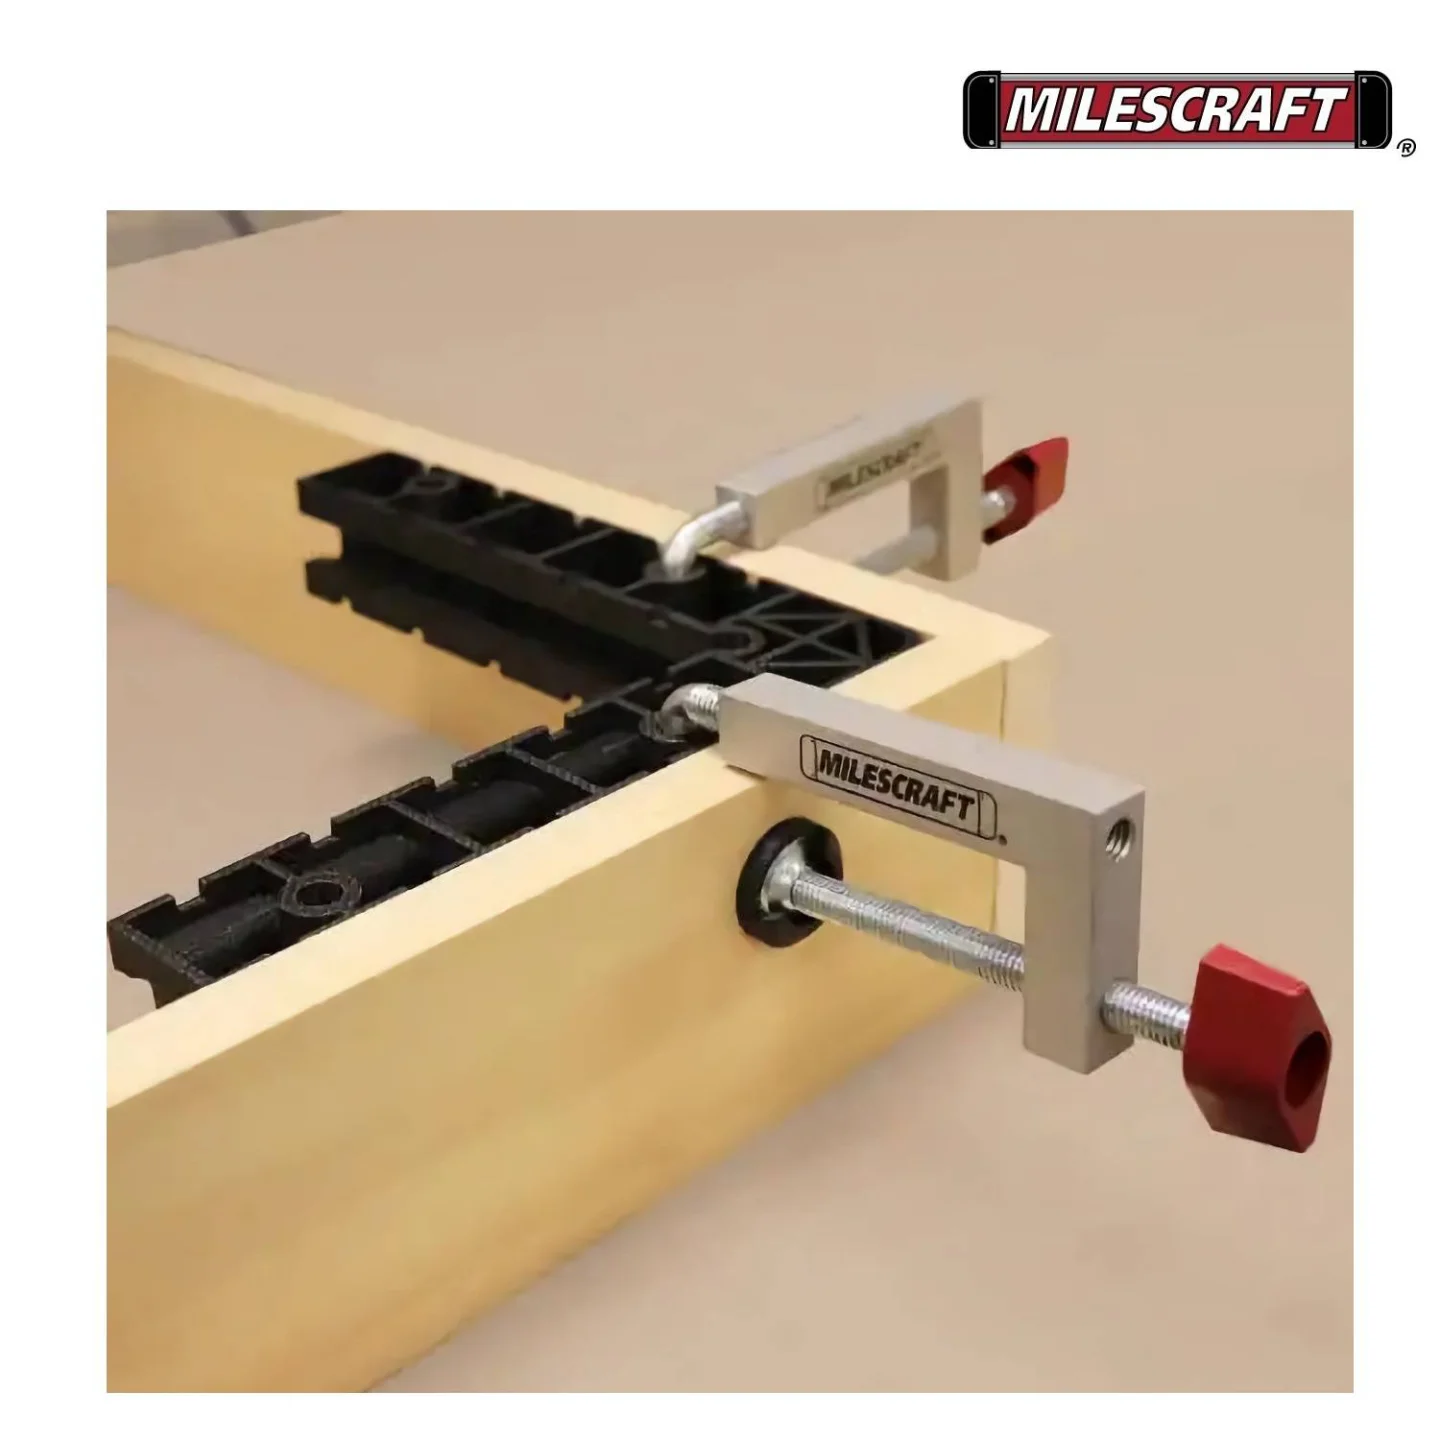 Milescraft-FenceClamps-4009.